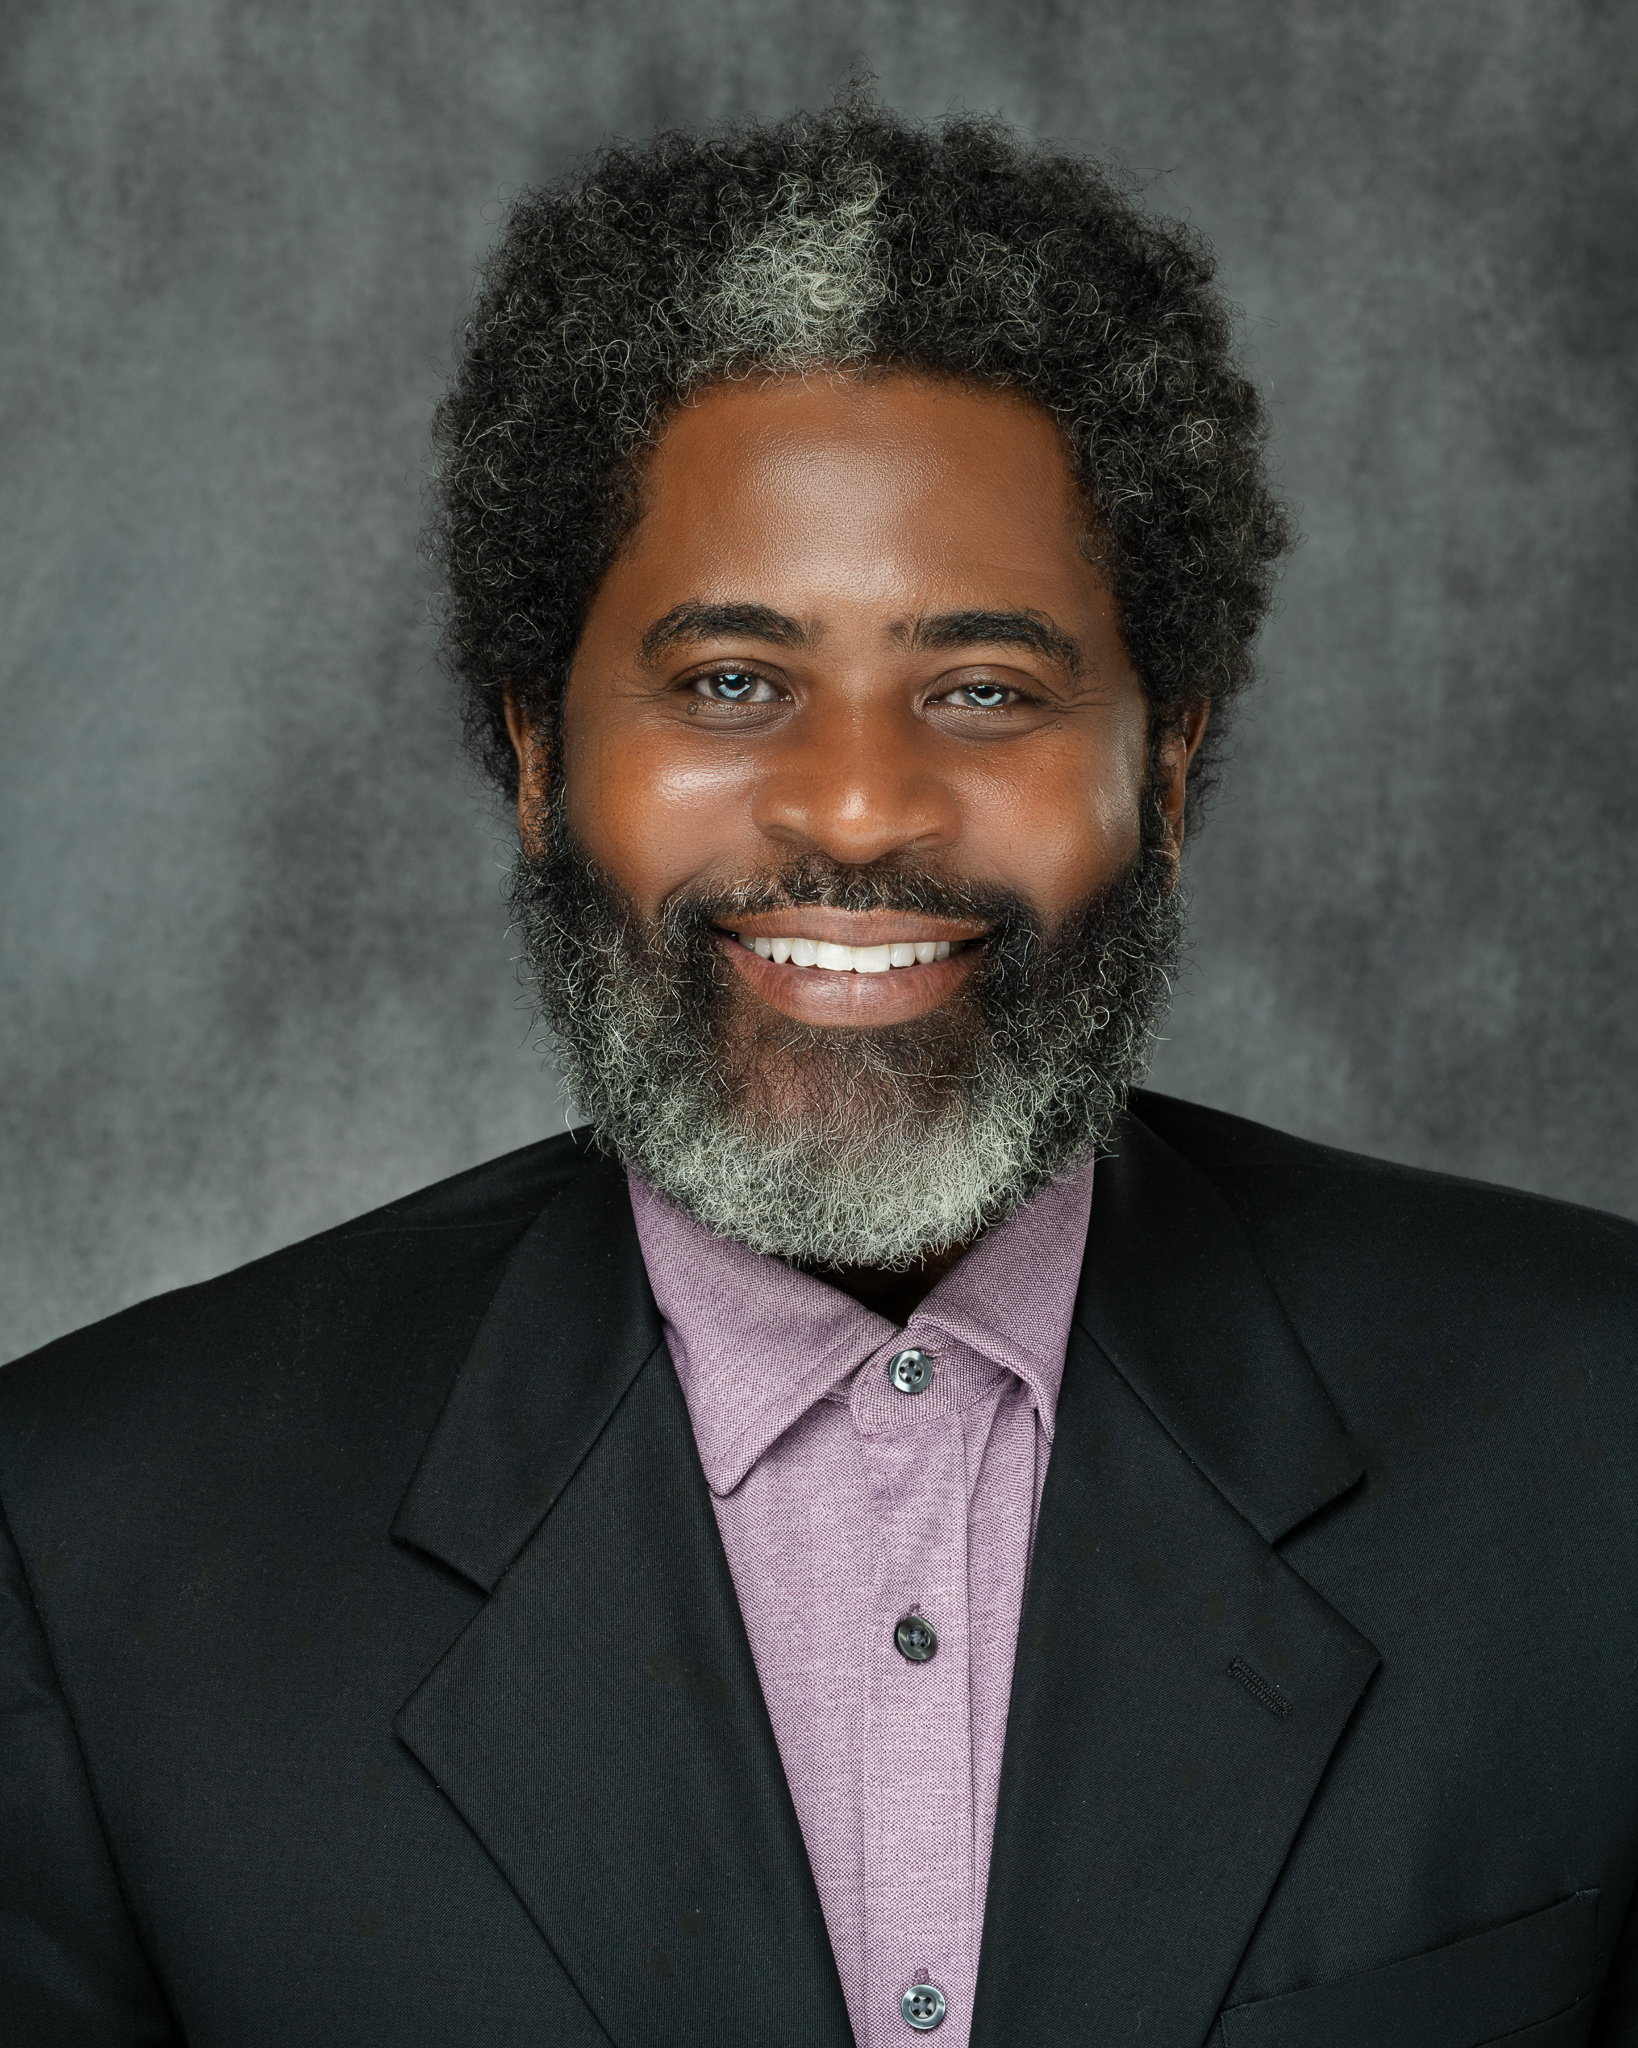 Professional Business Headshot of a man smiling, in a black suit, taken by PWG Lens - Atlanta Headshot Photographer.